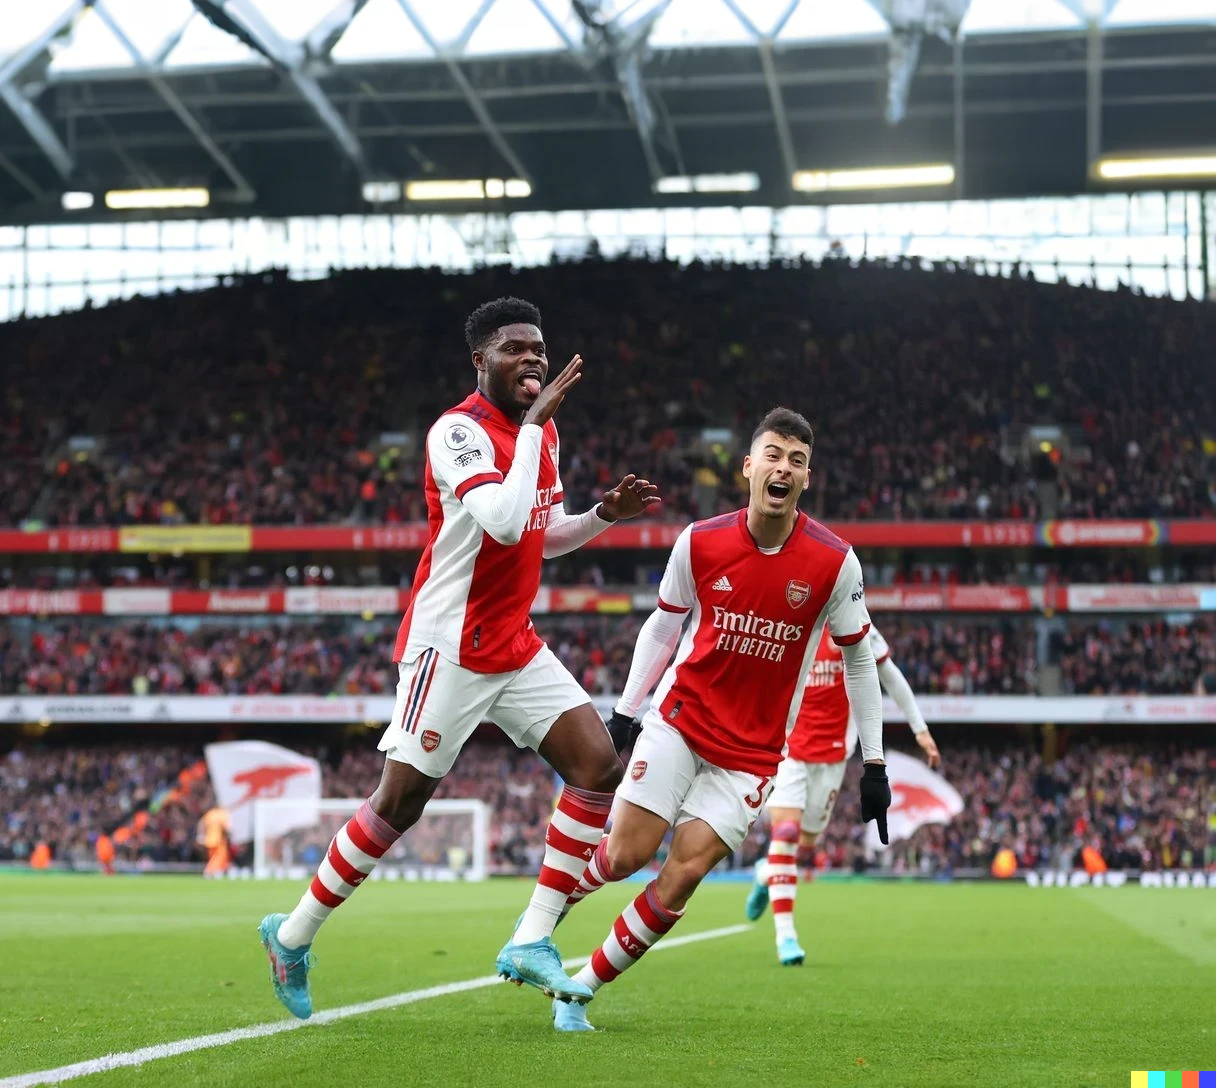 Arsenal Looking Formidable After Nine Games in EPL